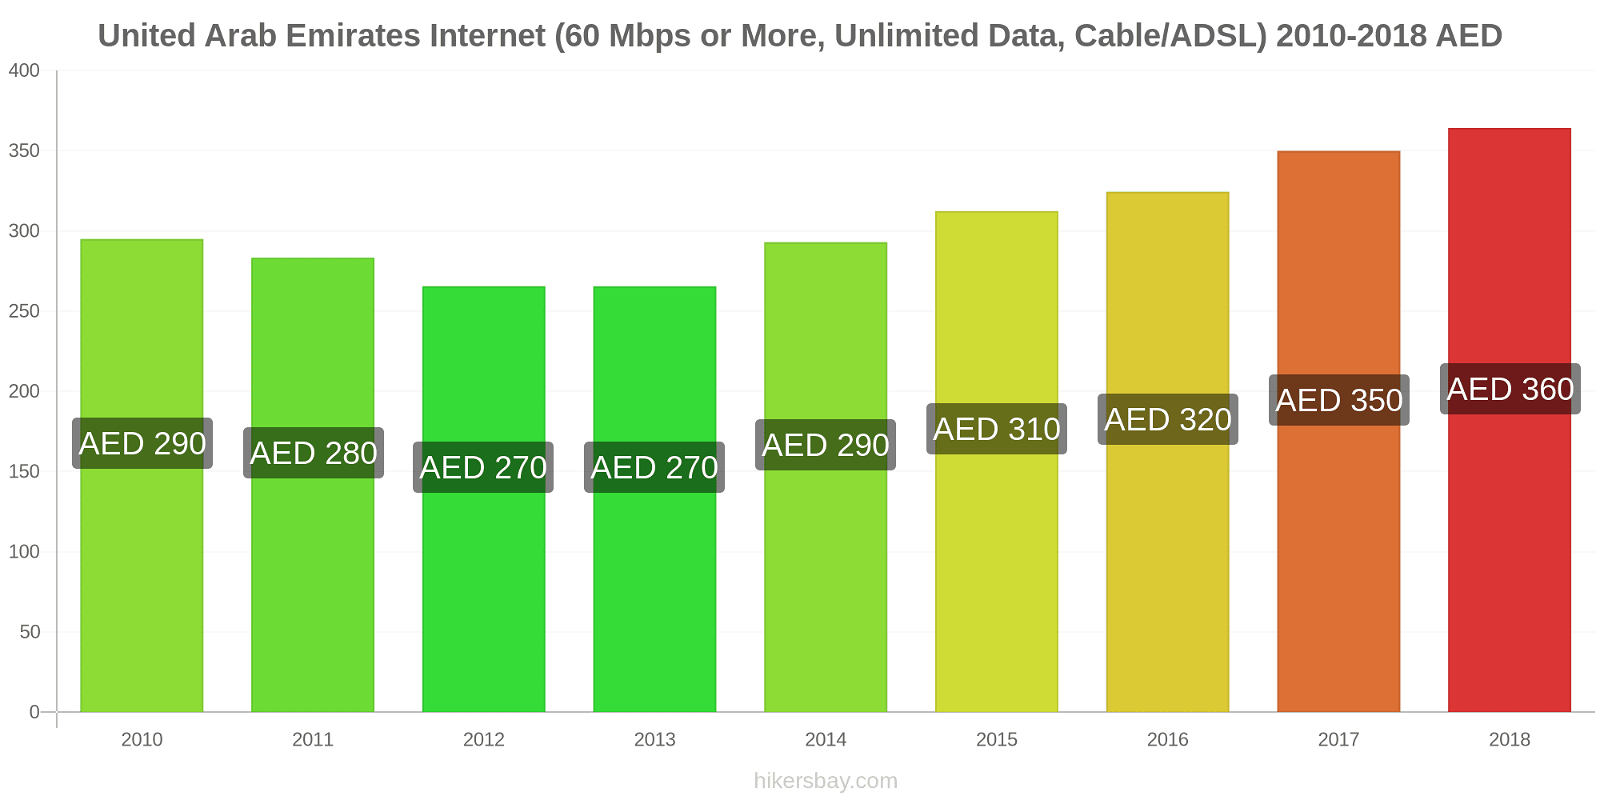 United Arab Emirates price changes Internet (60 Mbps or more, unlimited data, cable/ADSL) hikersbay.com